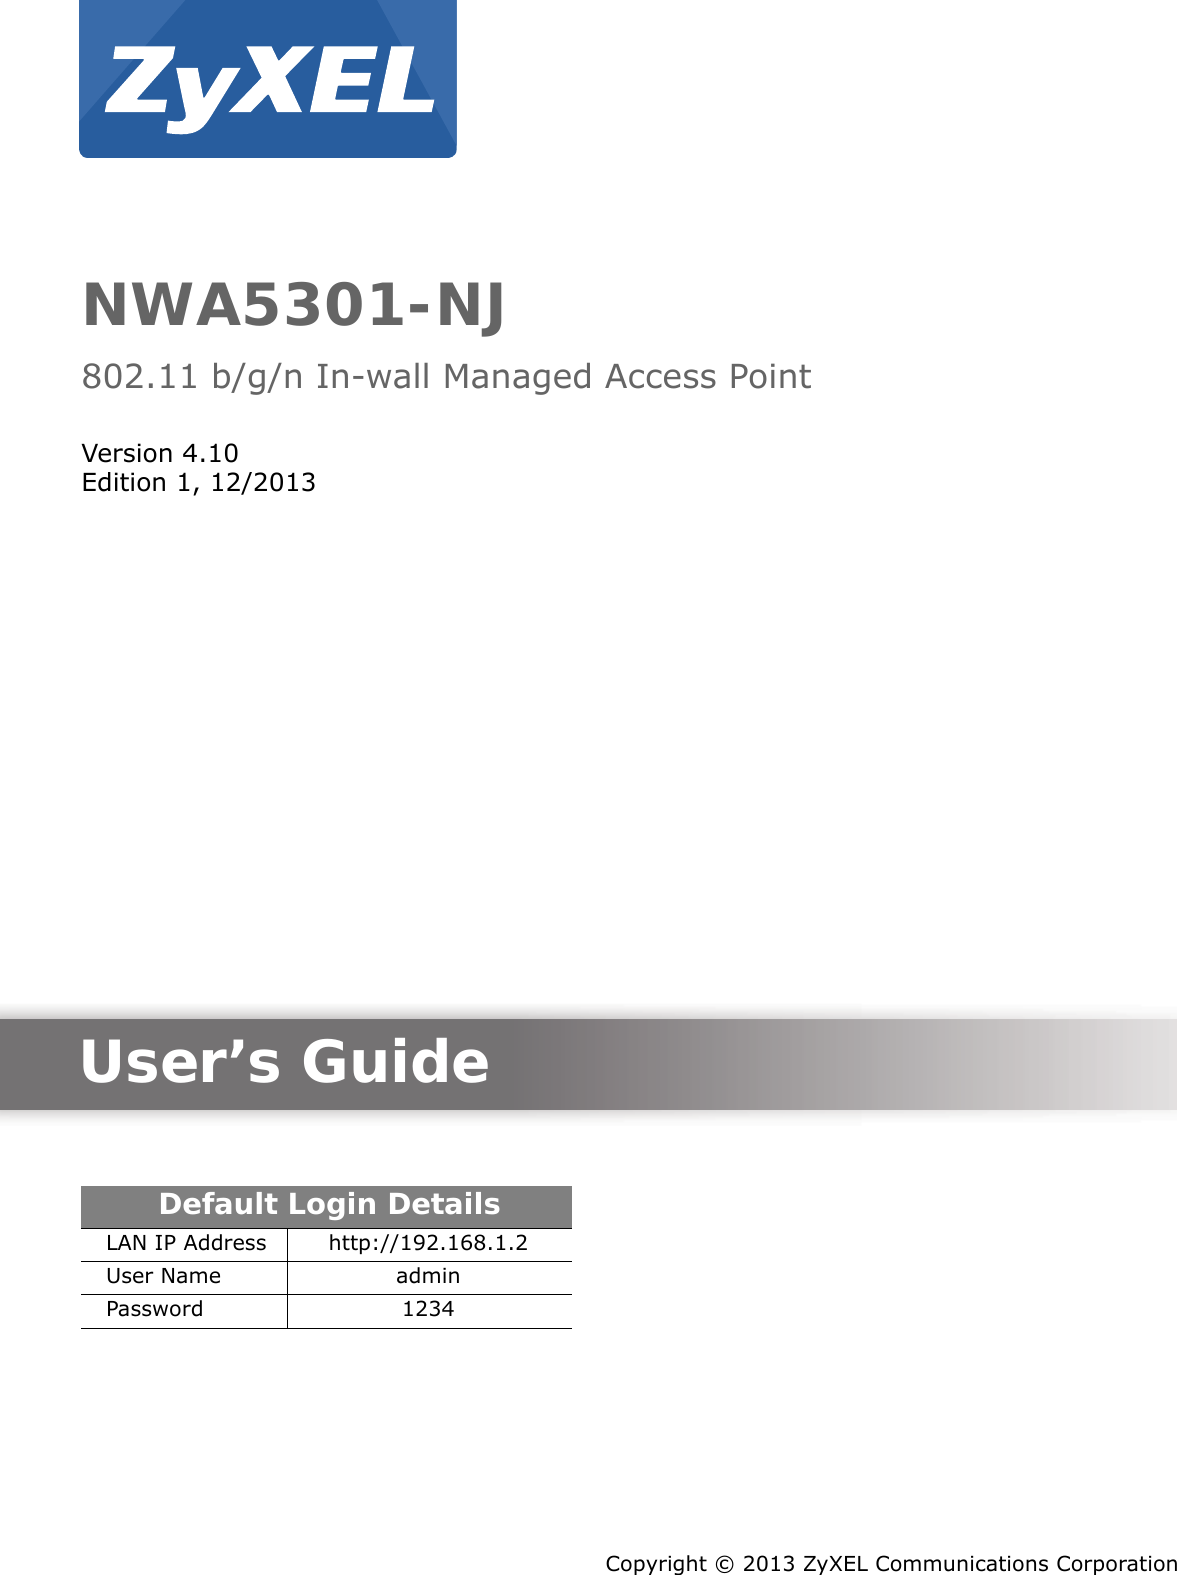 Quick Start Guidewww.zyxel.comNWA5301-NJ802.11 b/g/n In-wall Managed Access PointVersion 4.10Edition 1, 12/2013Copyright © 2013 ZyXEL Communications CorporationUser’s GuideDefault Login DetailsLAN IP Address http://192.168.1.2User Name adminPassword 1234